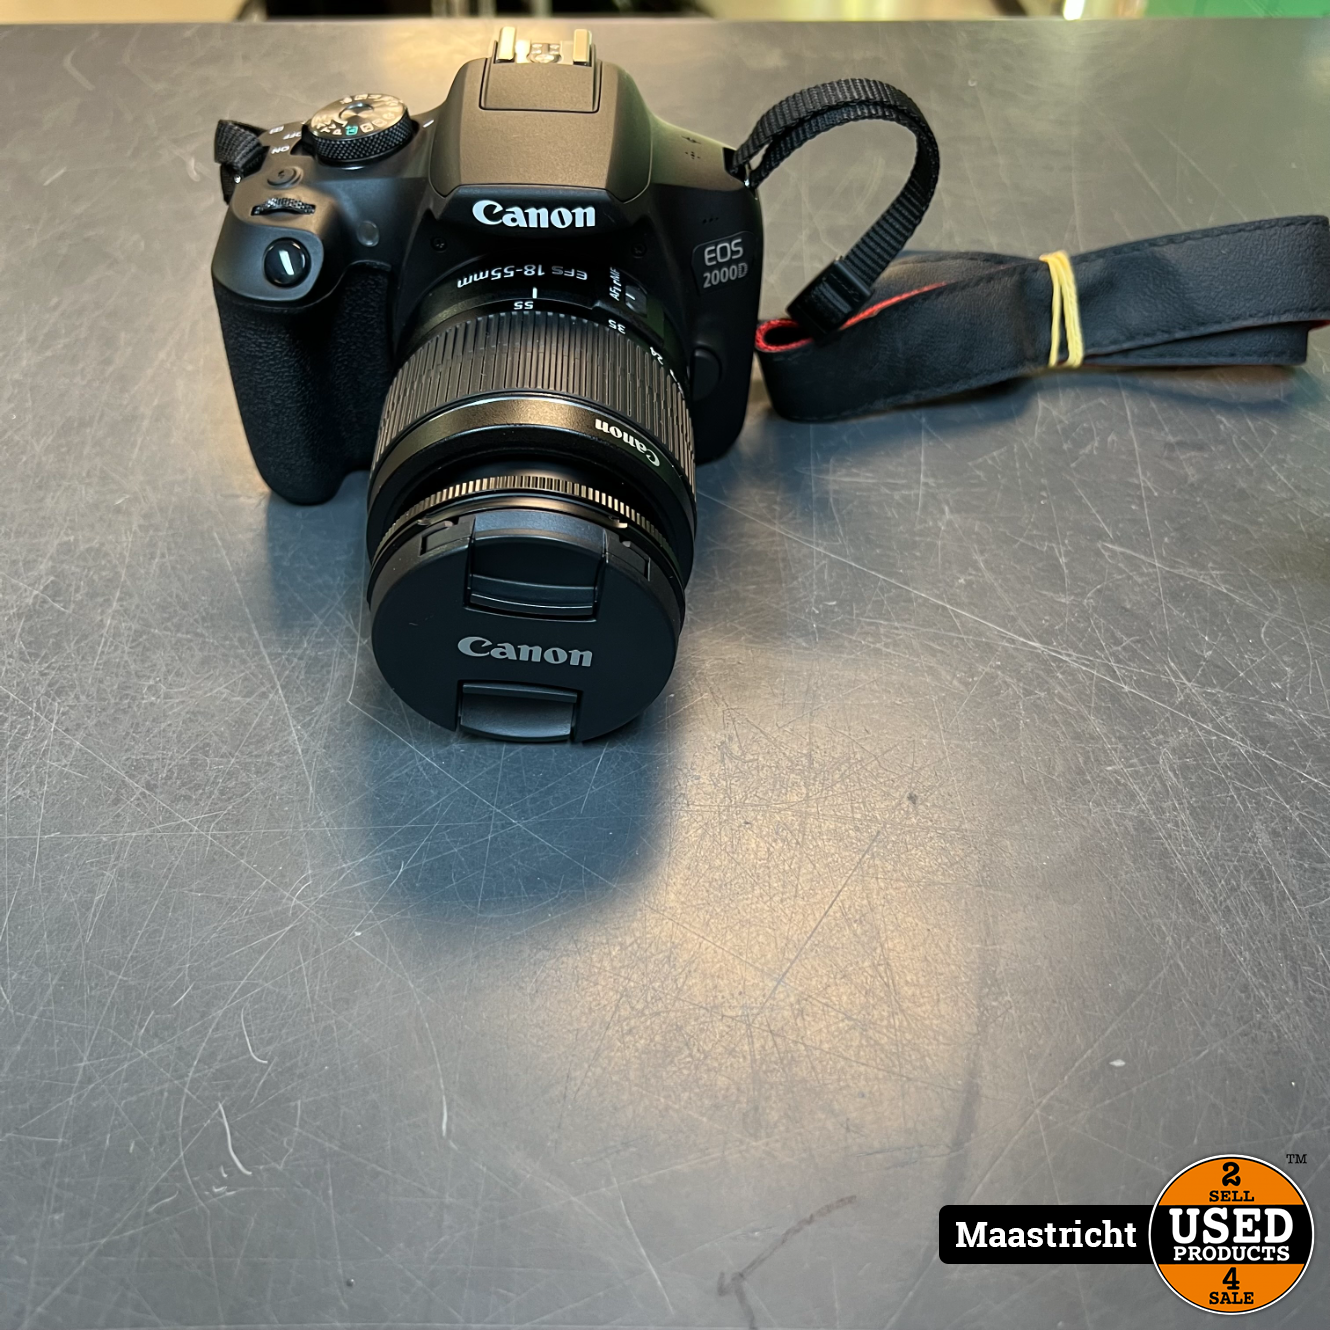 Canon Eos 2000D camera - Used Products Maastricht